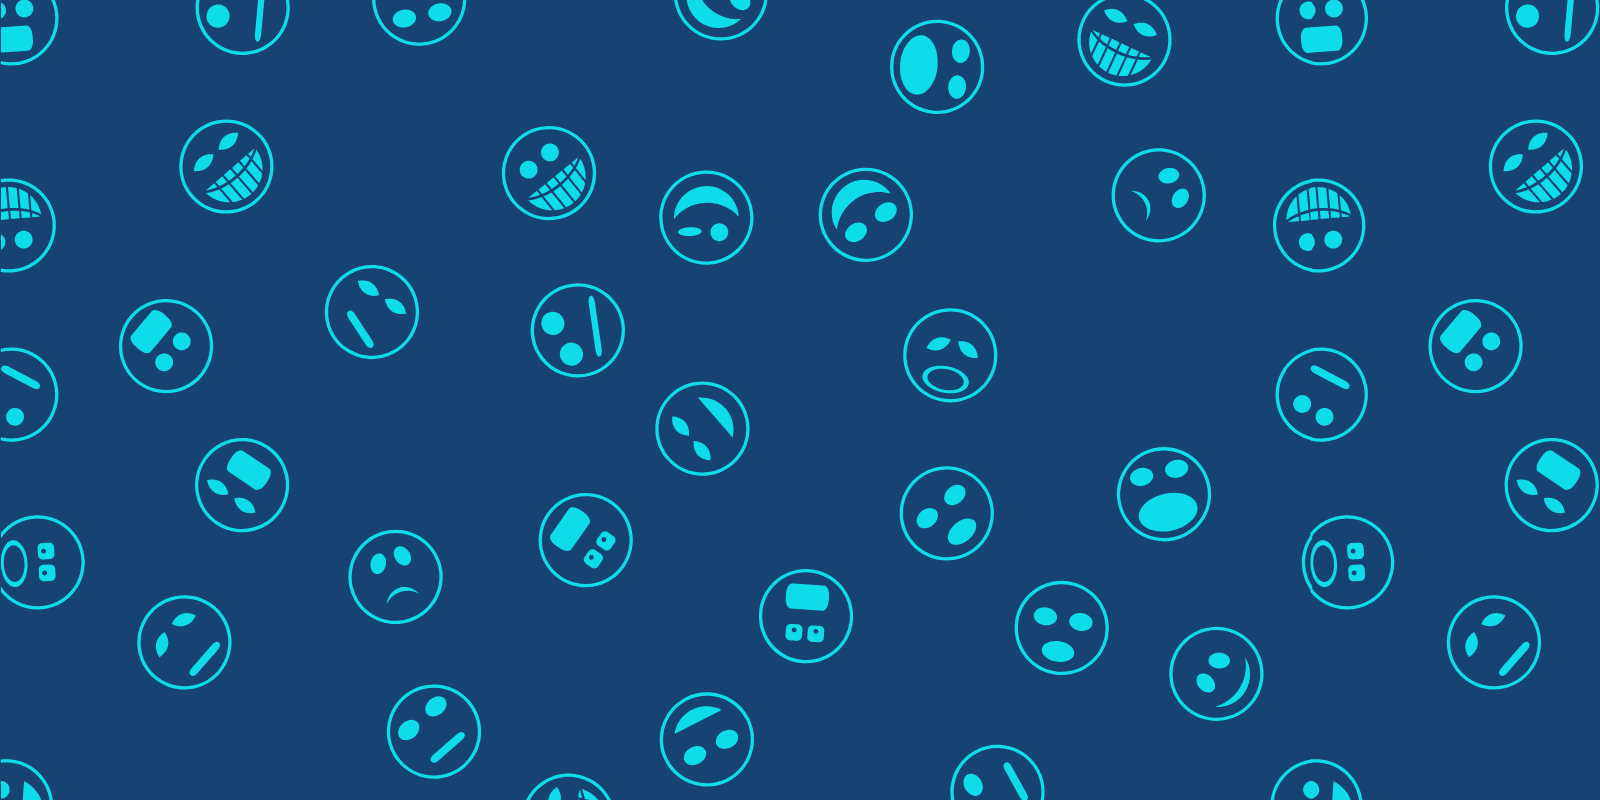 Face icons expressing different emotions scattered around a navy background